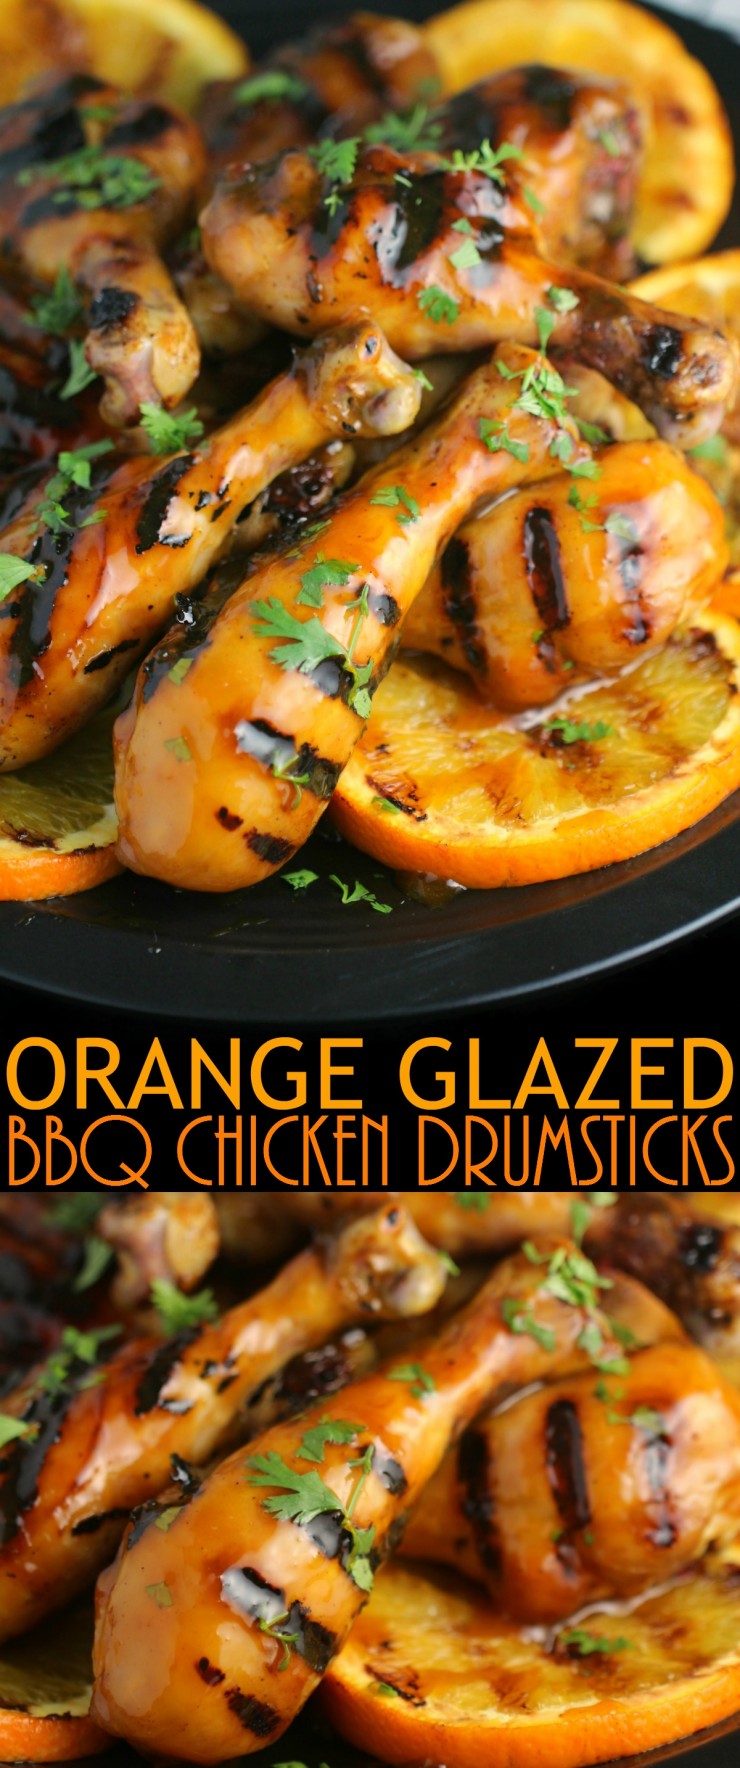 Marinated and grilled in a scotch bonnet and orange glaze, these chicken drumsticks are perfectly sweet and spicy. This is one grilled chicken recipe you'll be craving all summer long!